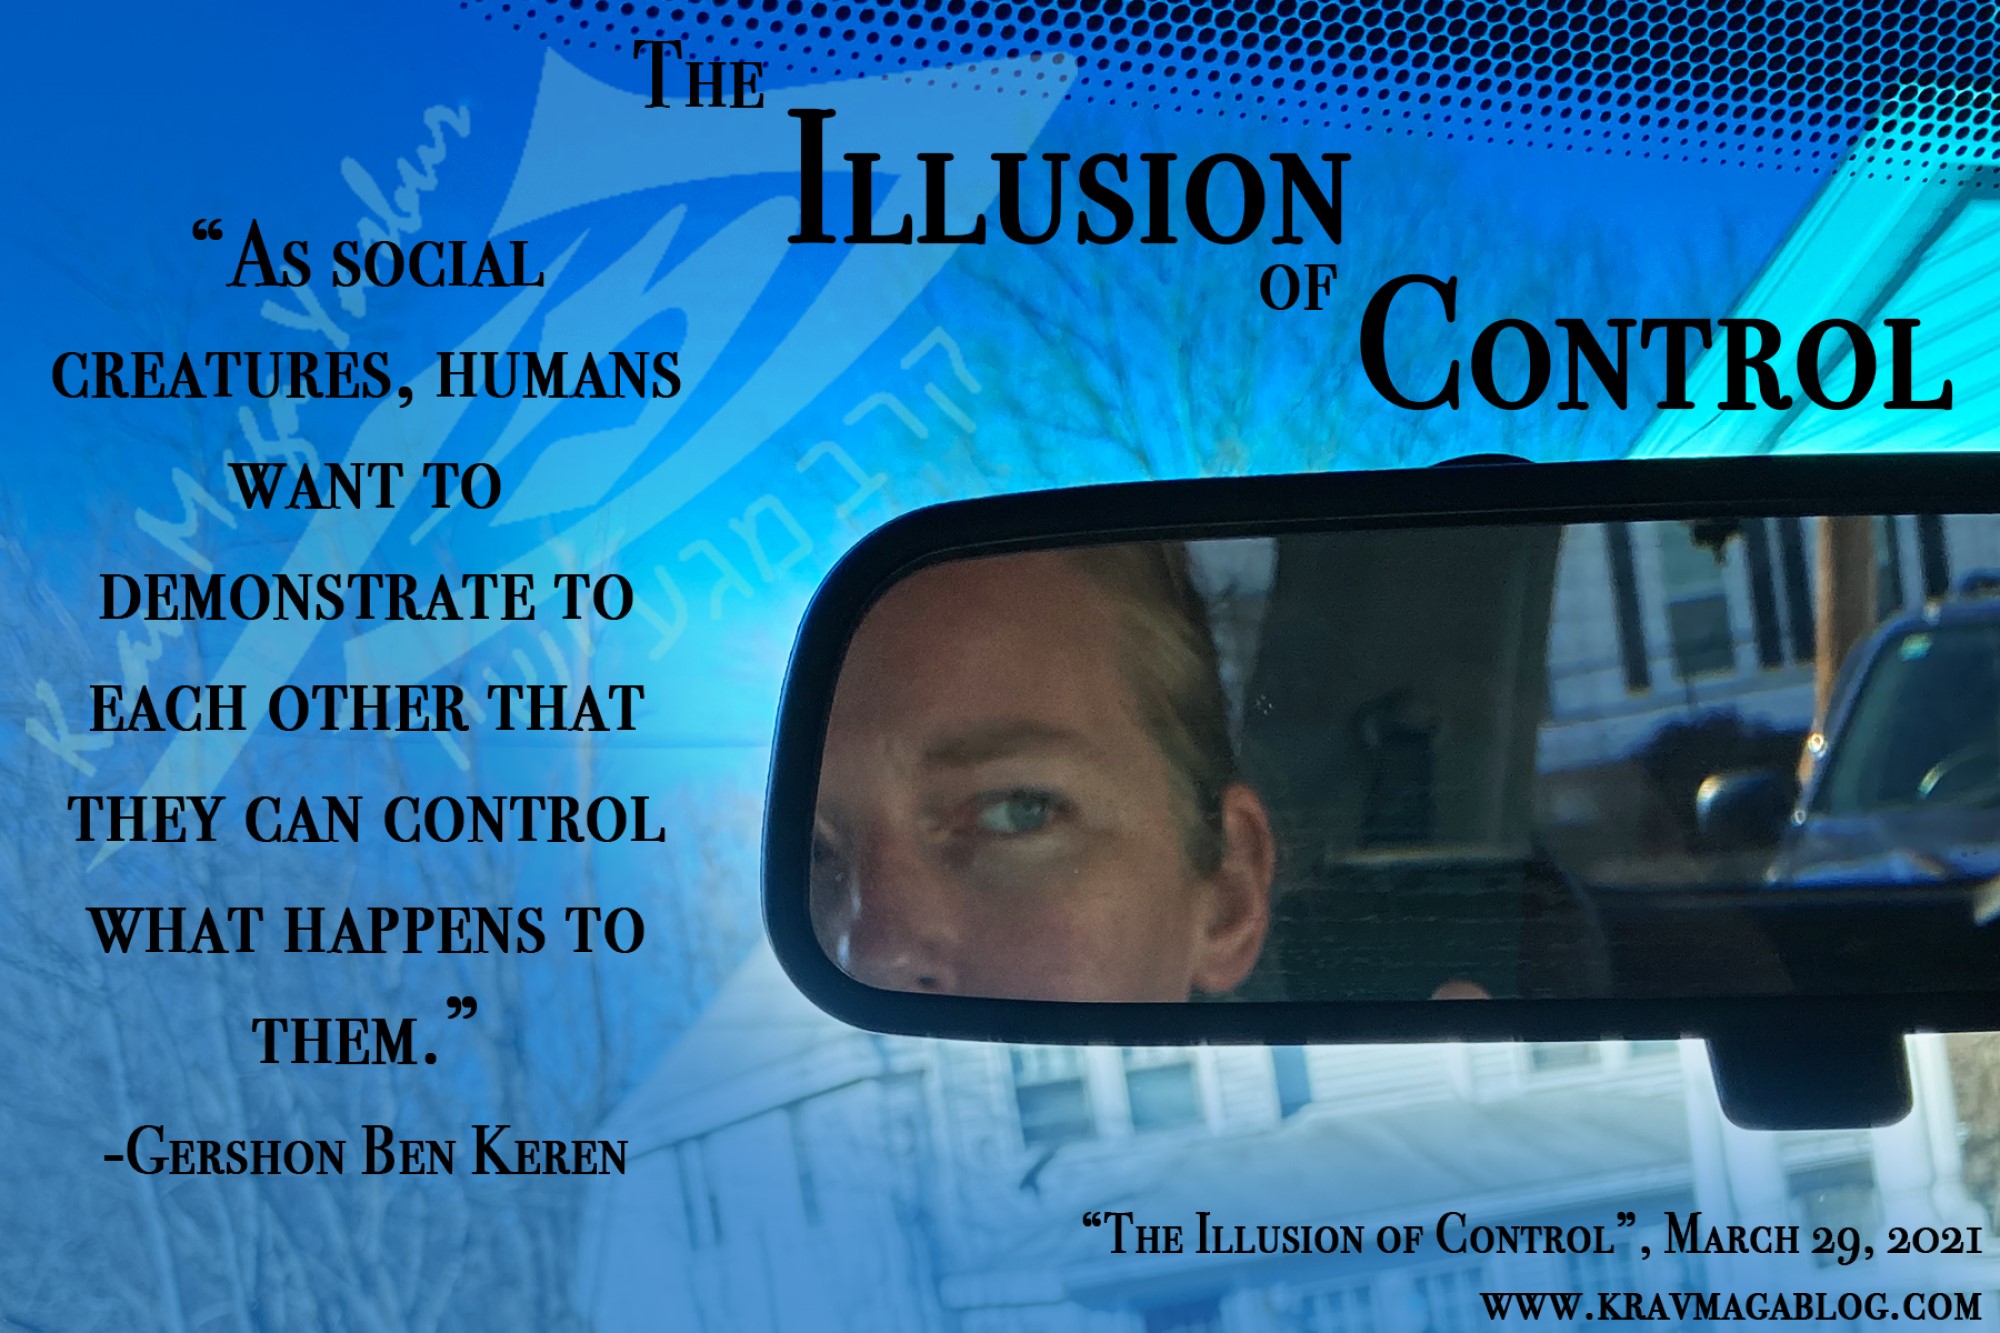 Blog About The Illusion of Control